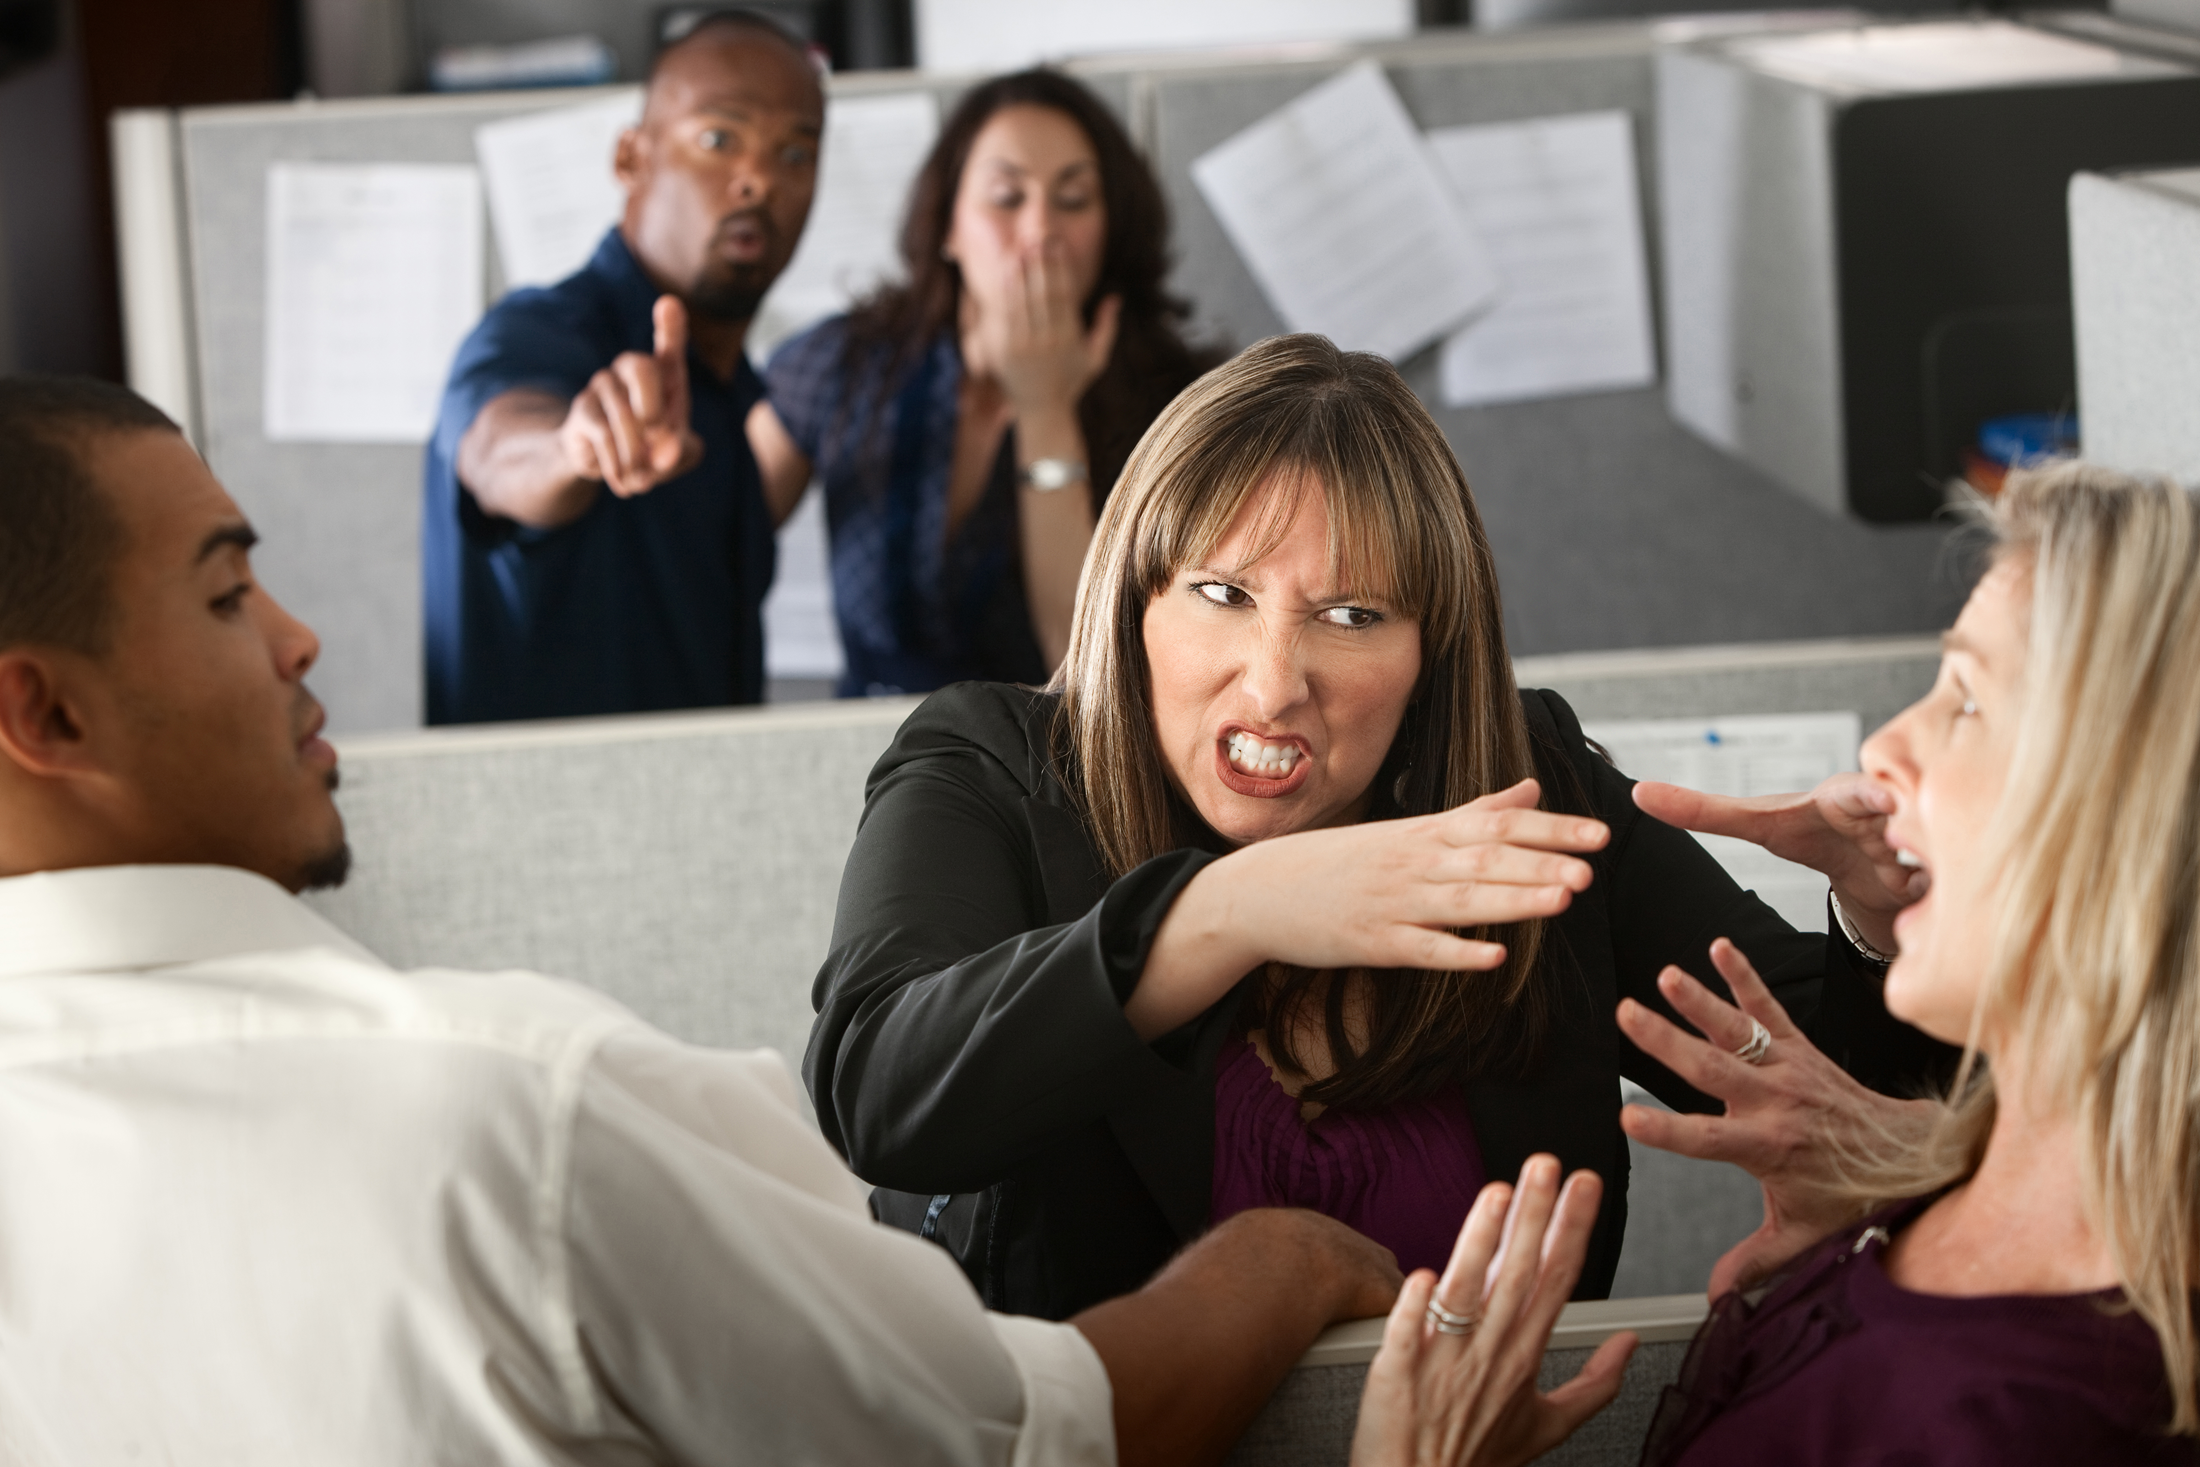 workplace violence warning sign stock photo